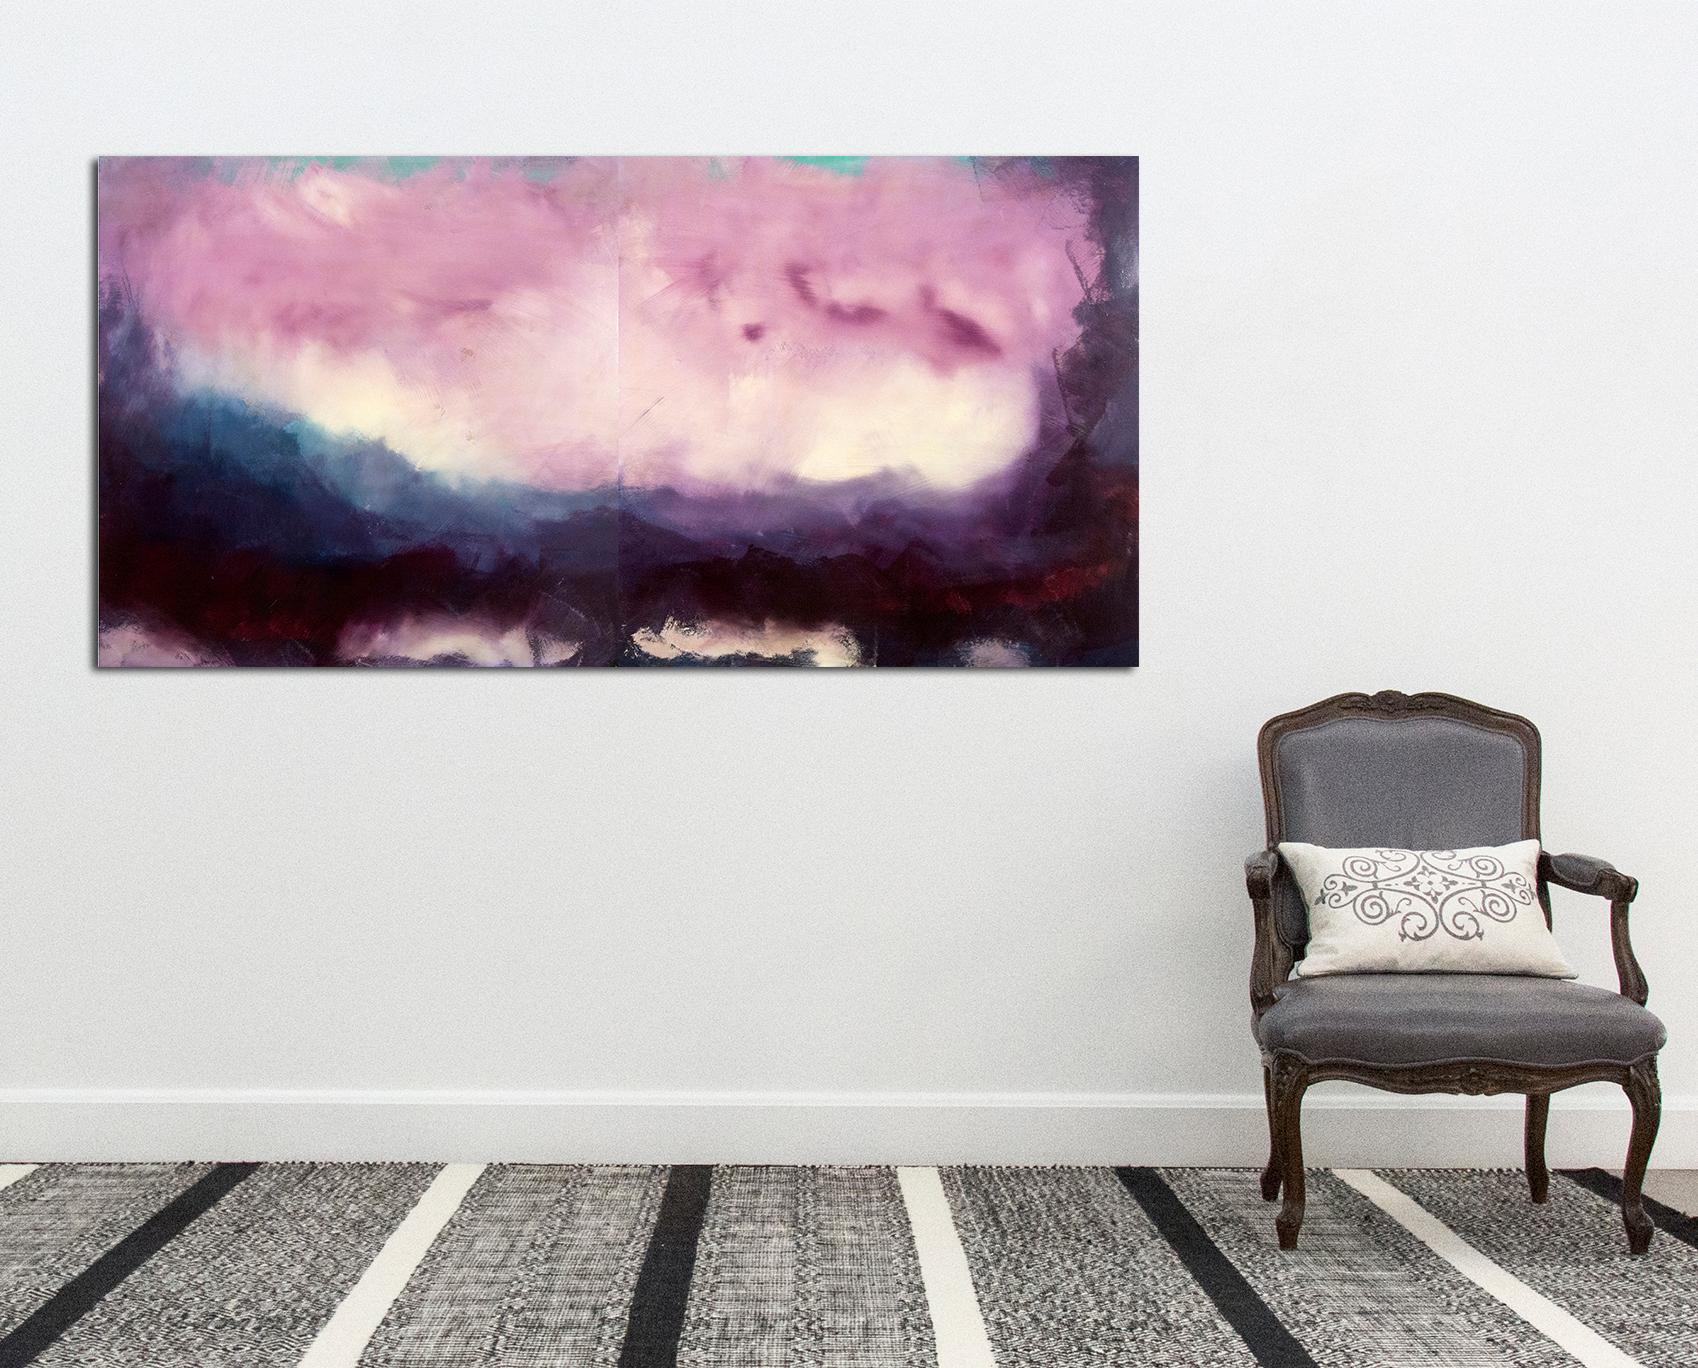 Dark clouds at a stormy horizon meet a violet sky in this emotive diptych by Jay Hodgins. Layers of curated colors coated in a glossy resin create depth and light in the atmospheric painting. This work is part of the Rujuh series. Rujuh is